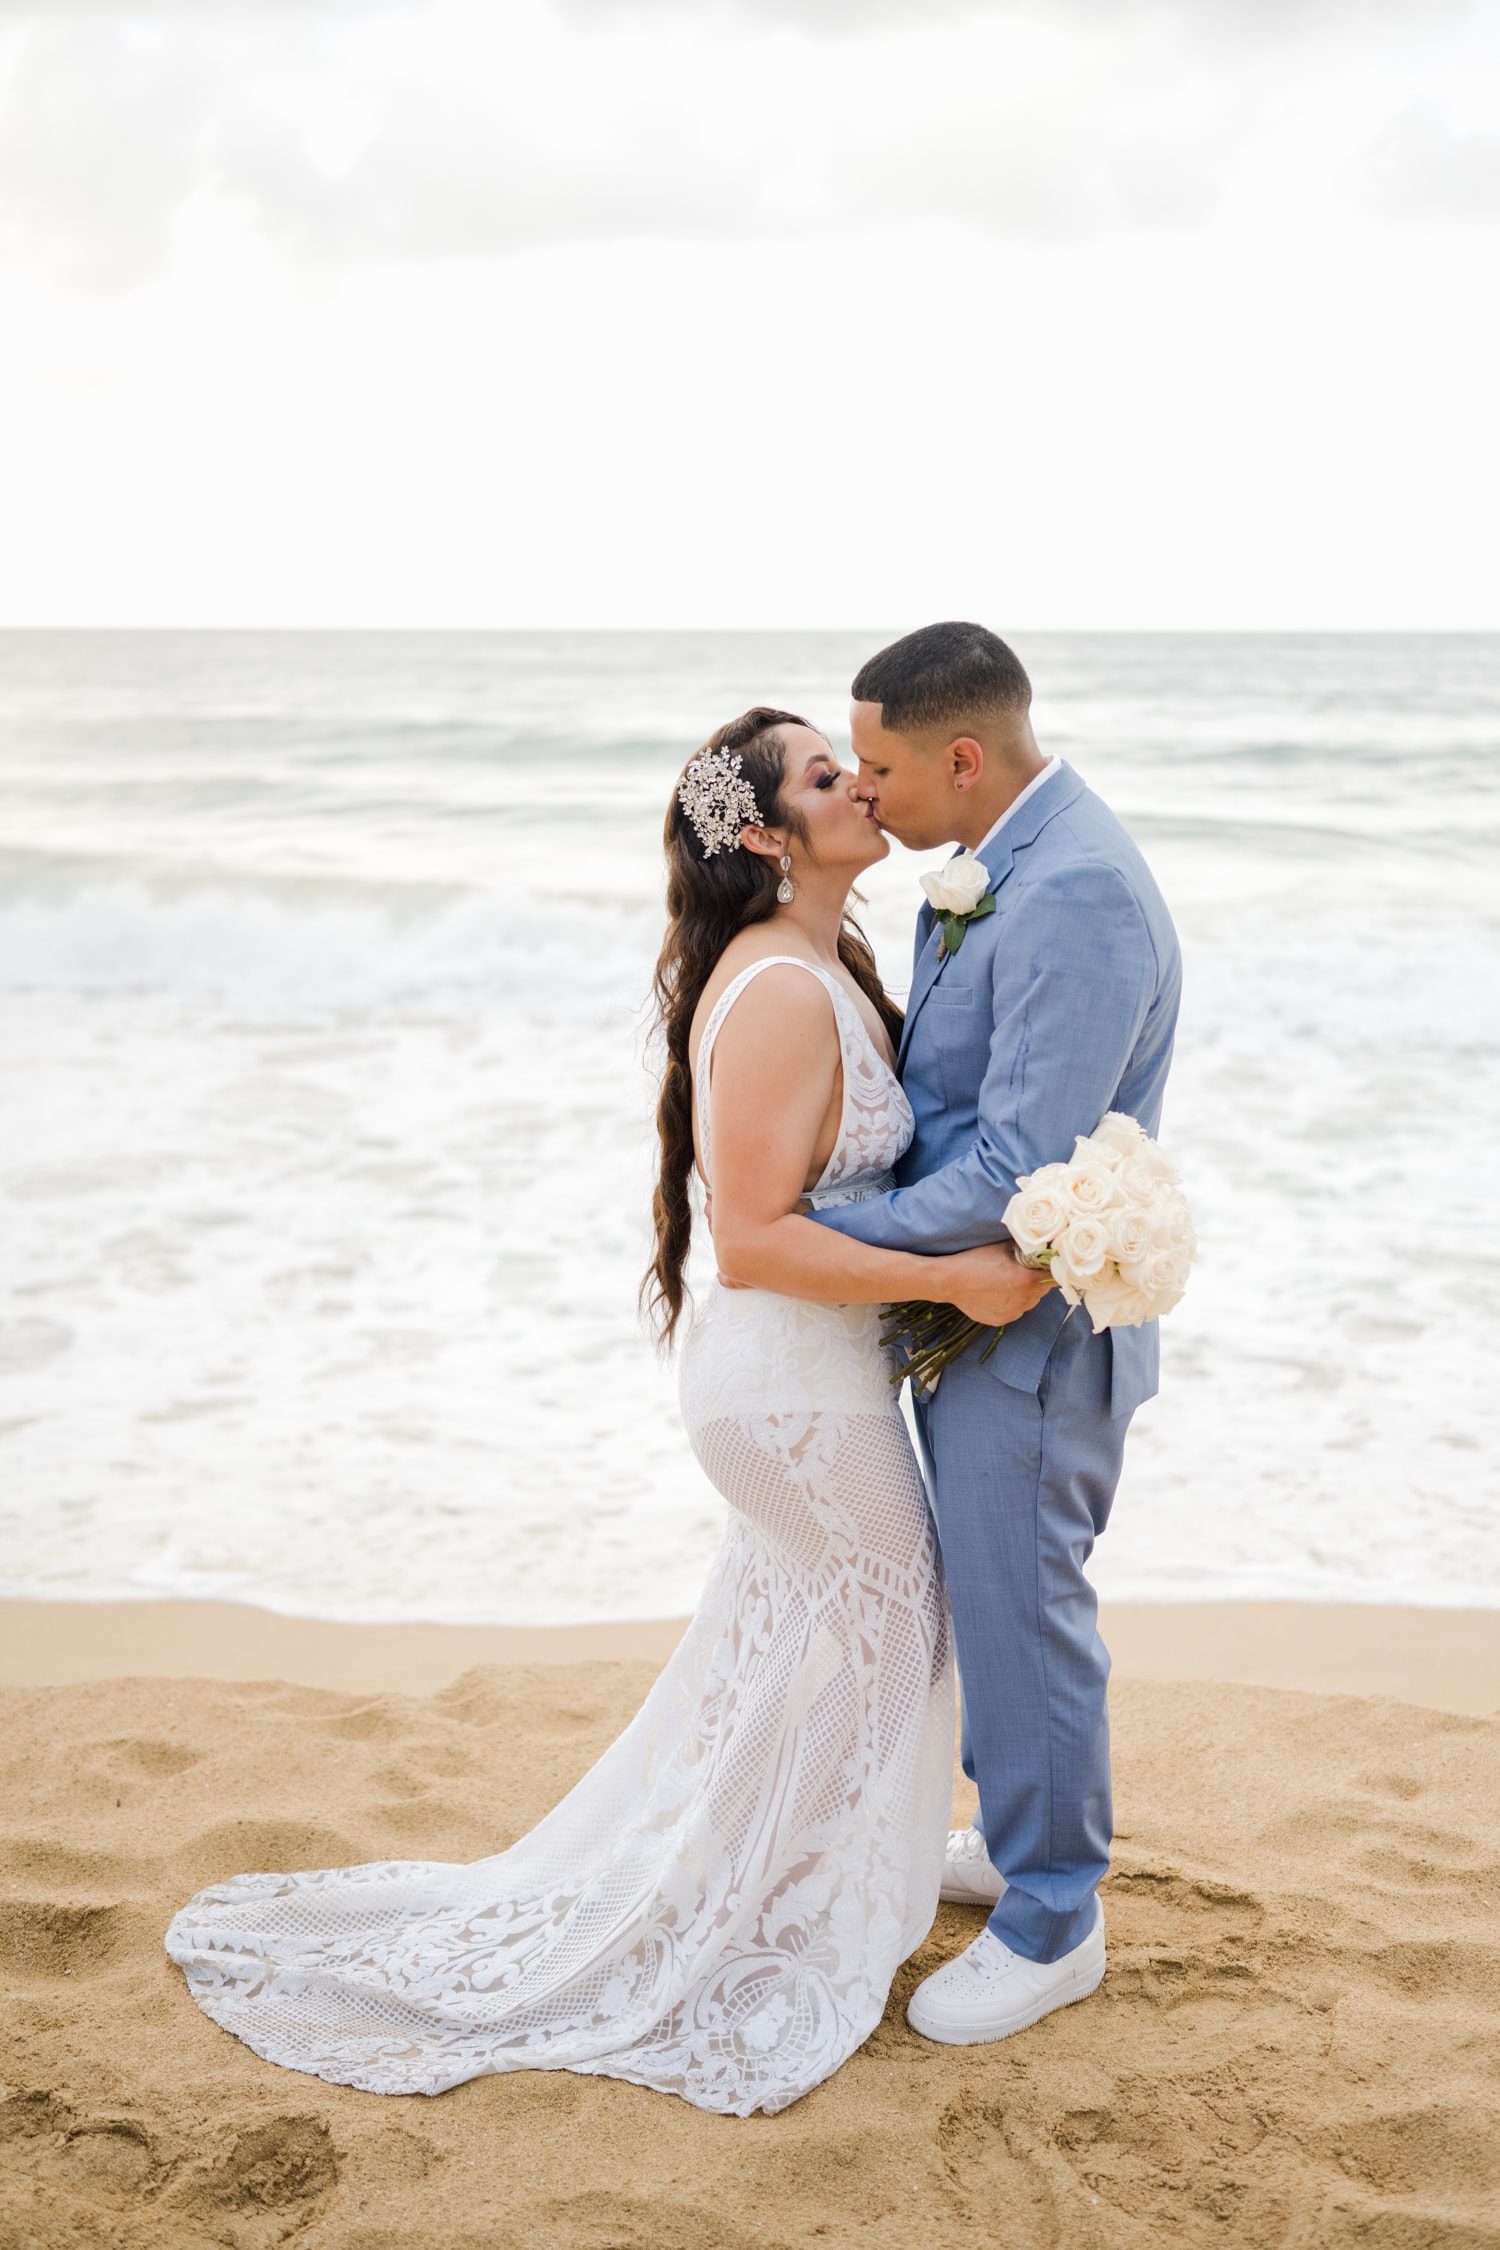 Aisha and Luis had a beautiful, intimate elopement at a beachfront Airbnb in Arecibo, Puerto Rico. One of the many stunning airbnb wedding venues on the Island.